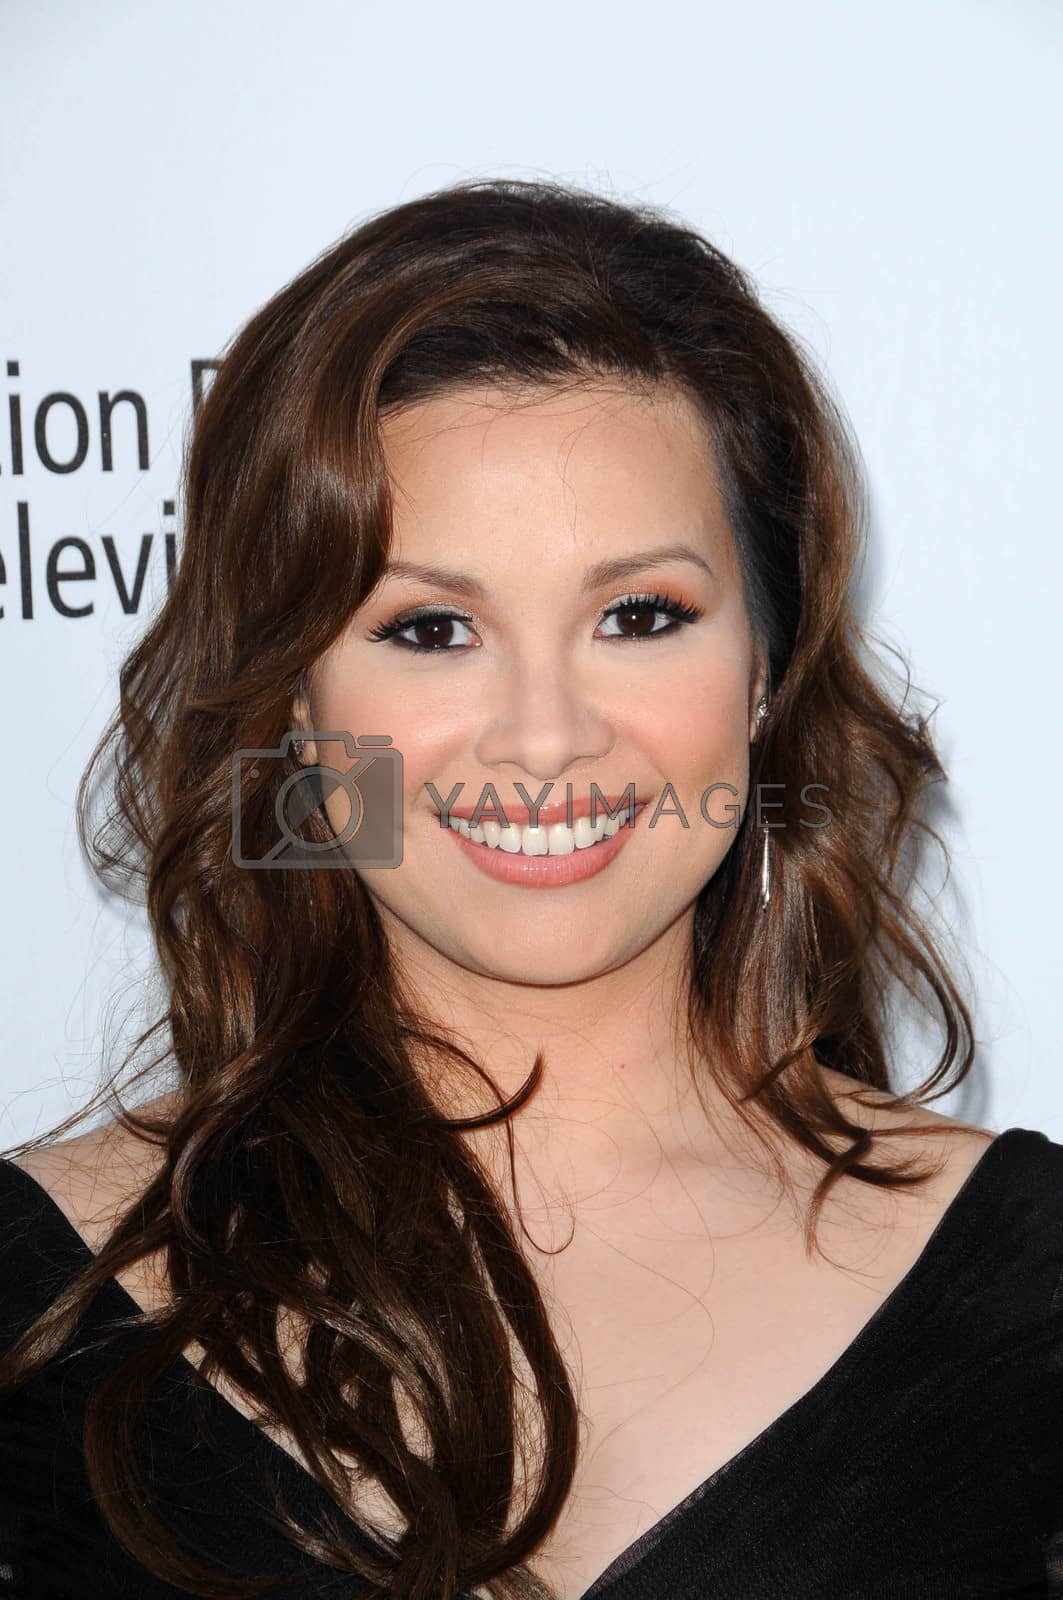 Royalty free image of Lea Salonga at the 5th Annual "A Fine Romance" Benefit Gala, 20th Century Fox Studios, Los Angeles, CA. 05-01-10/ImageCollect by ImageCollect